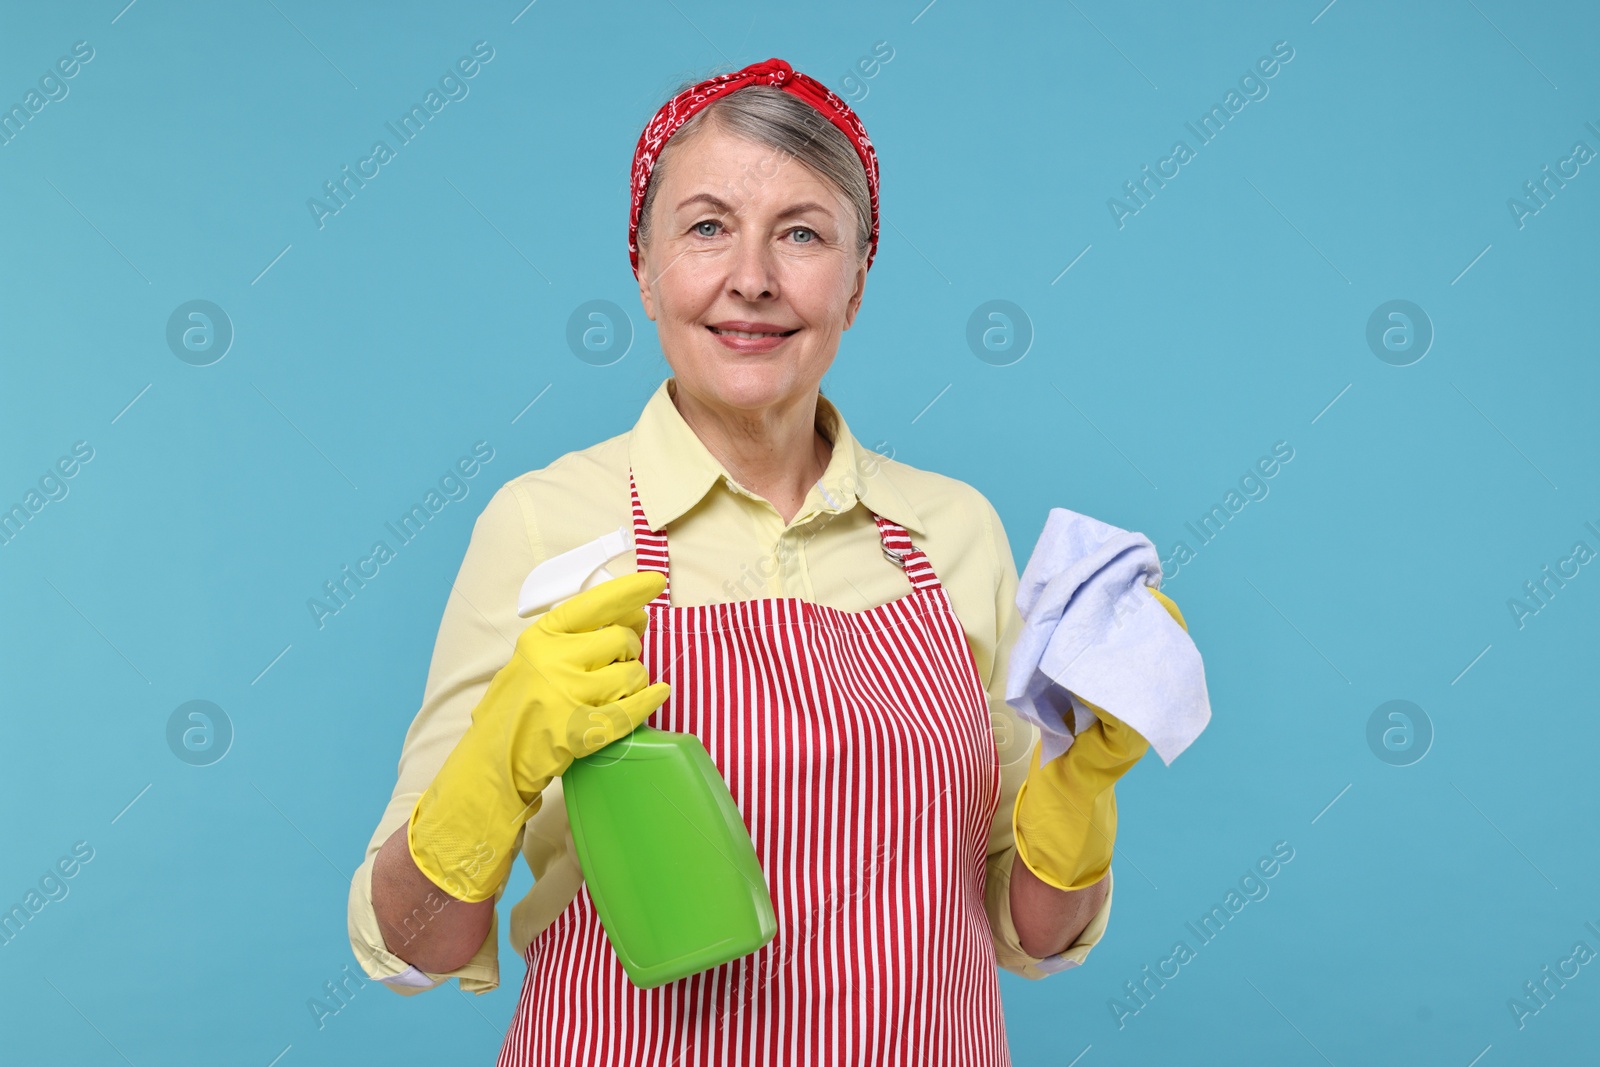 Photo of Happy housewife with spray bottle and rag on light blue background